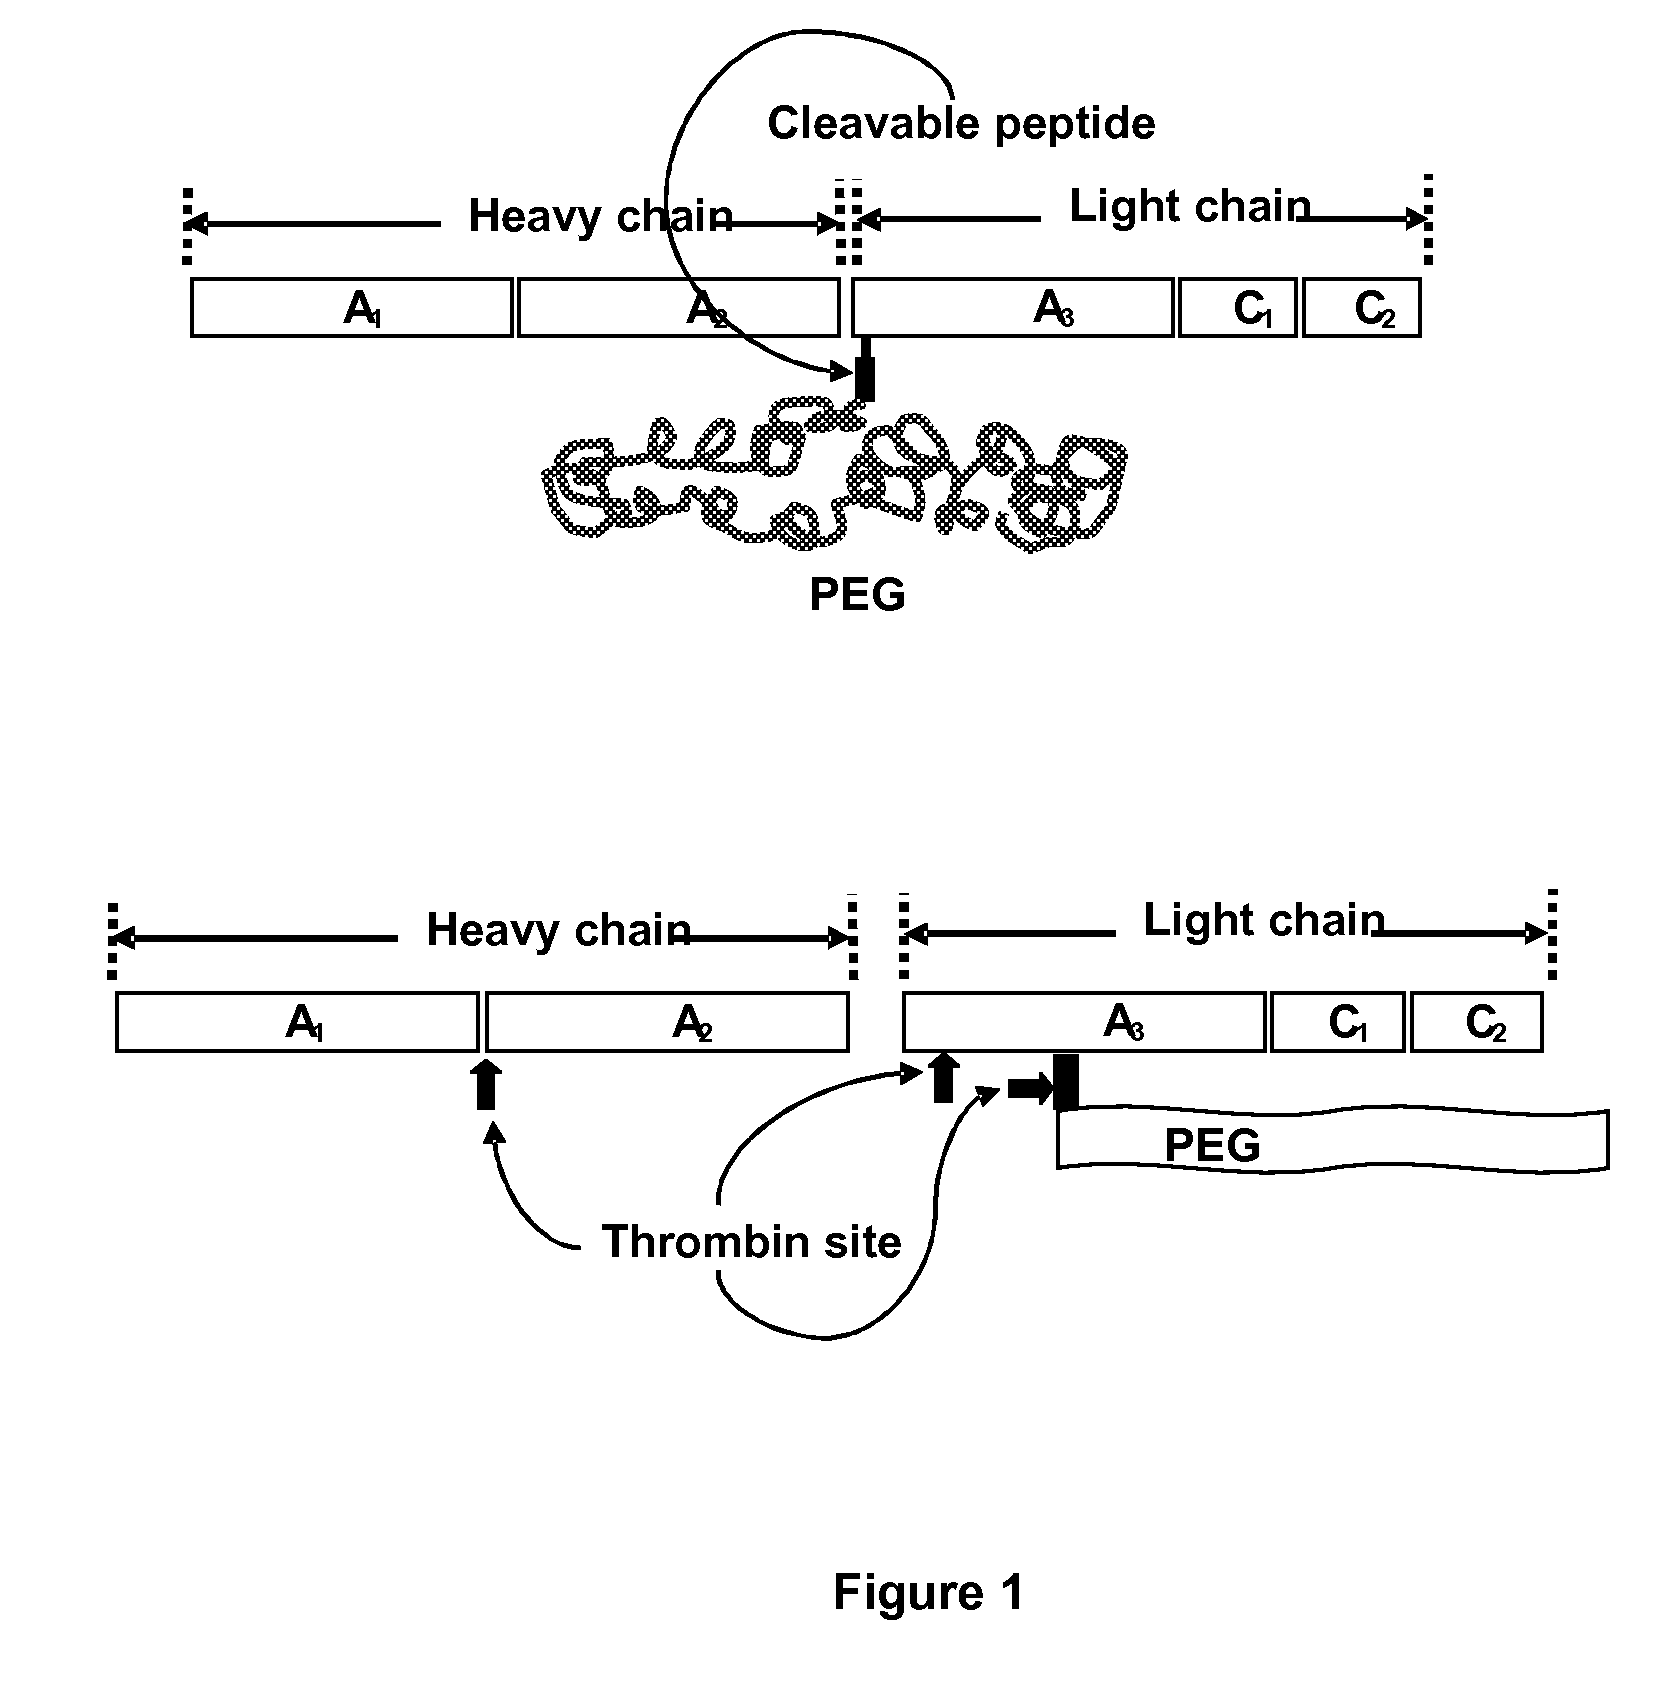 Protein conjugate having an endopeptidase- cleavable bioprotective moiety